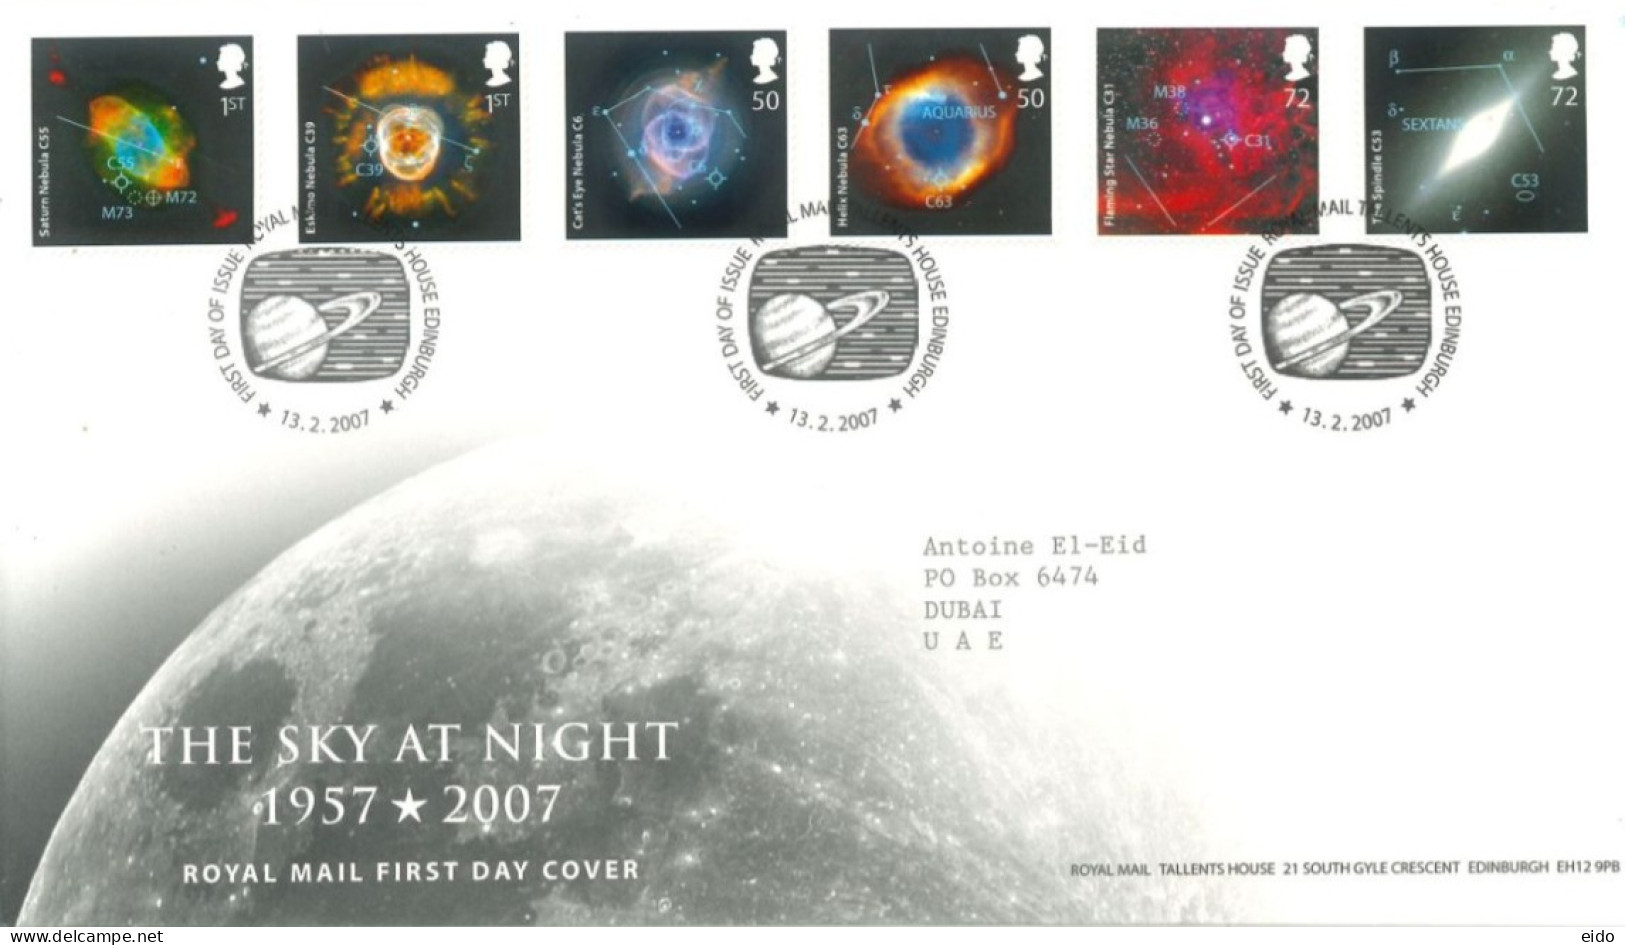 GREAT BRITAIN  - 2007, FDC OF THE SKY AT NIGHT STAMPS SET INCLUDING A PRESENTATION LEAFLET. - Covers & Documents